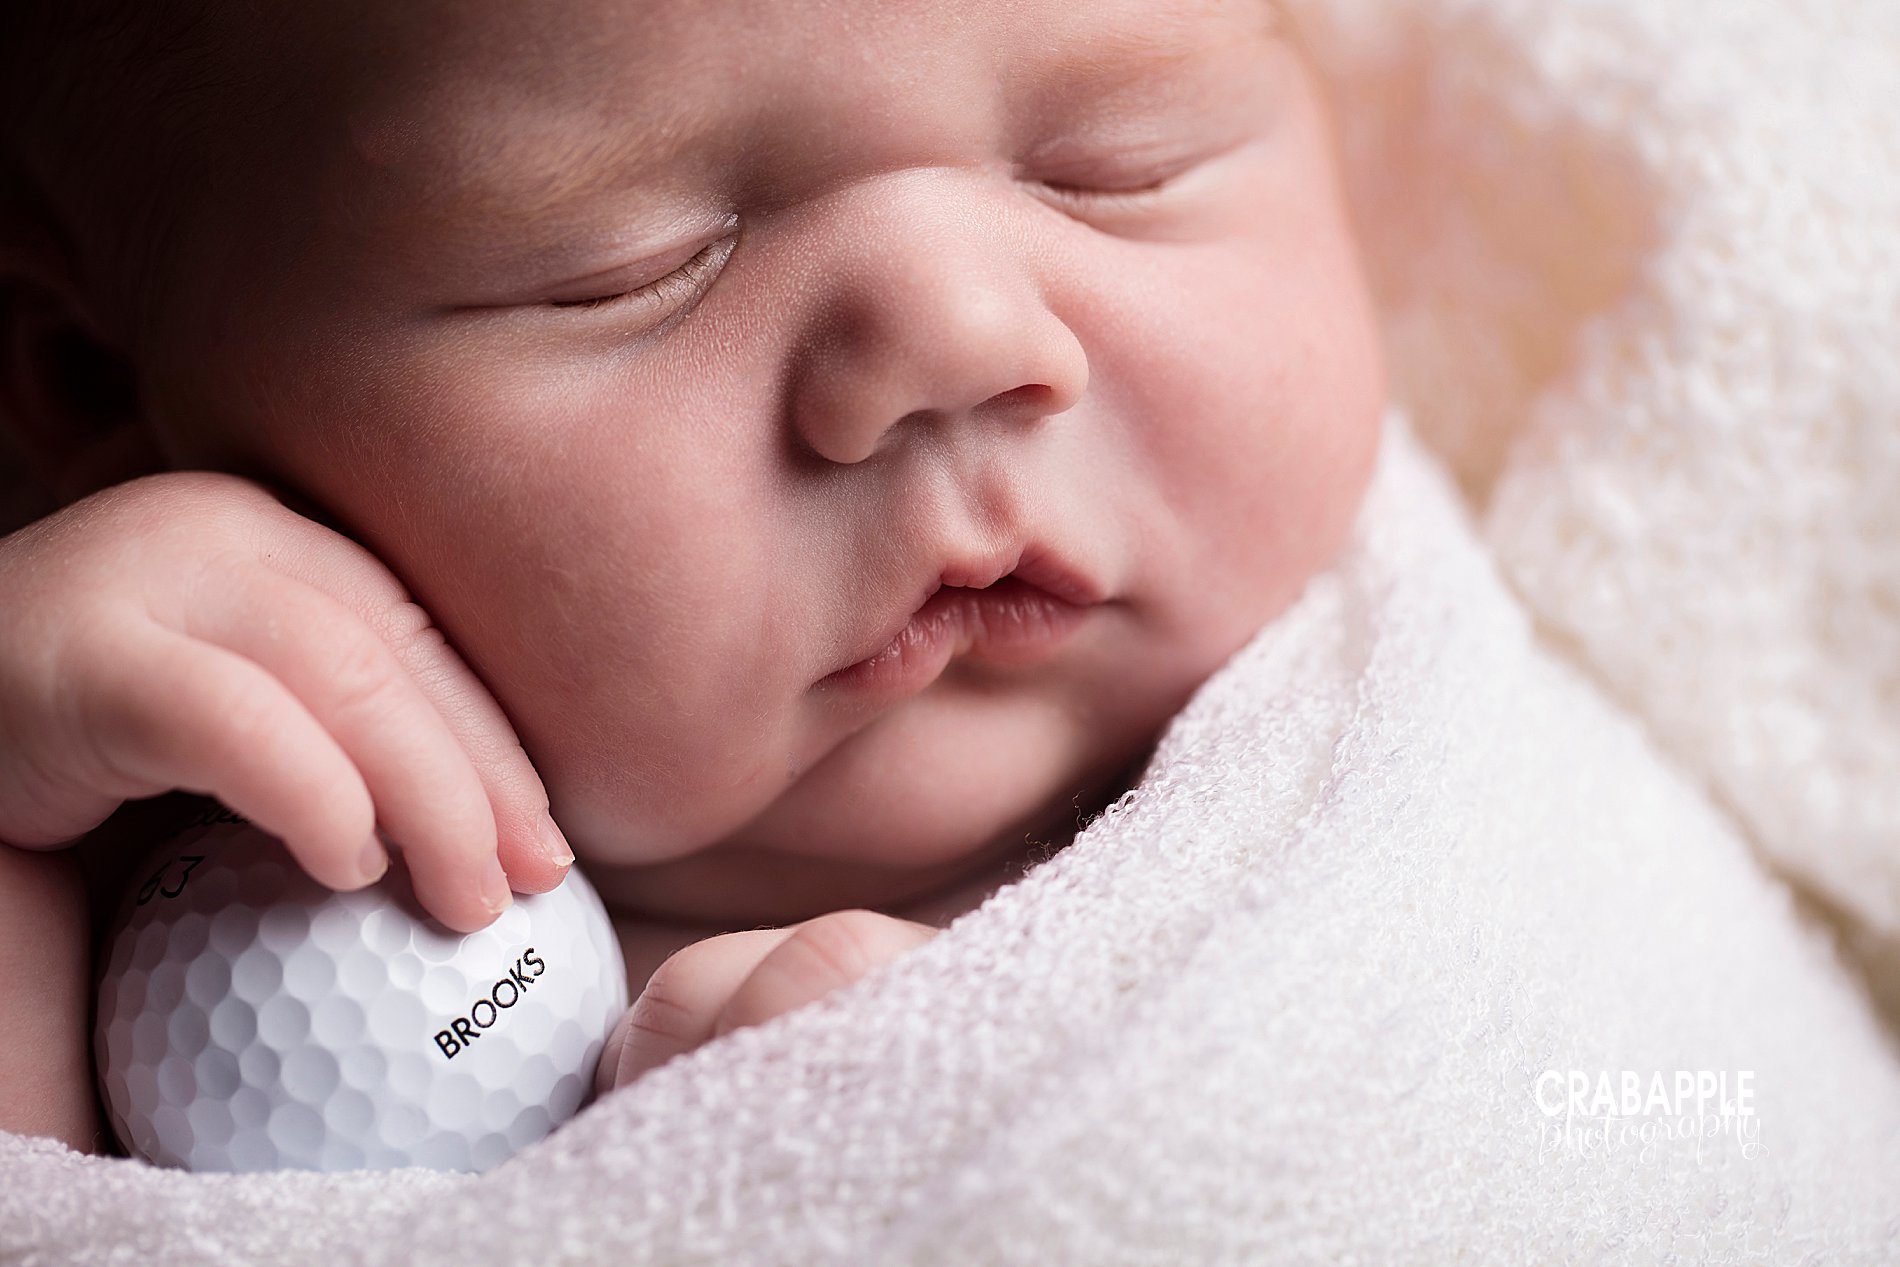 Close up newborn photos of baby's face and features including personalized golf ball with baby's name